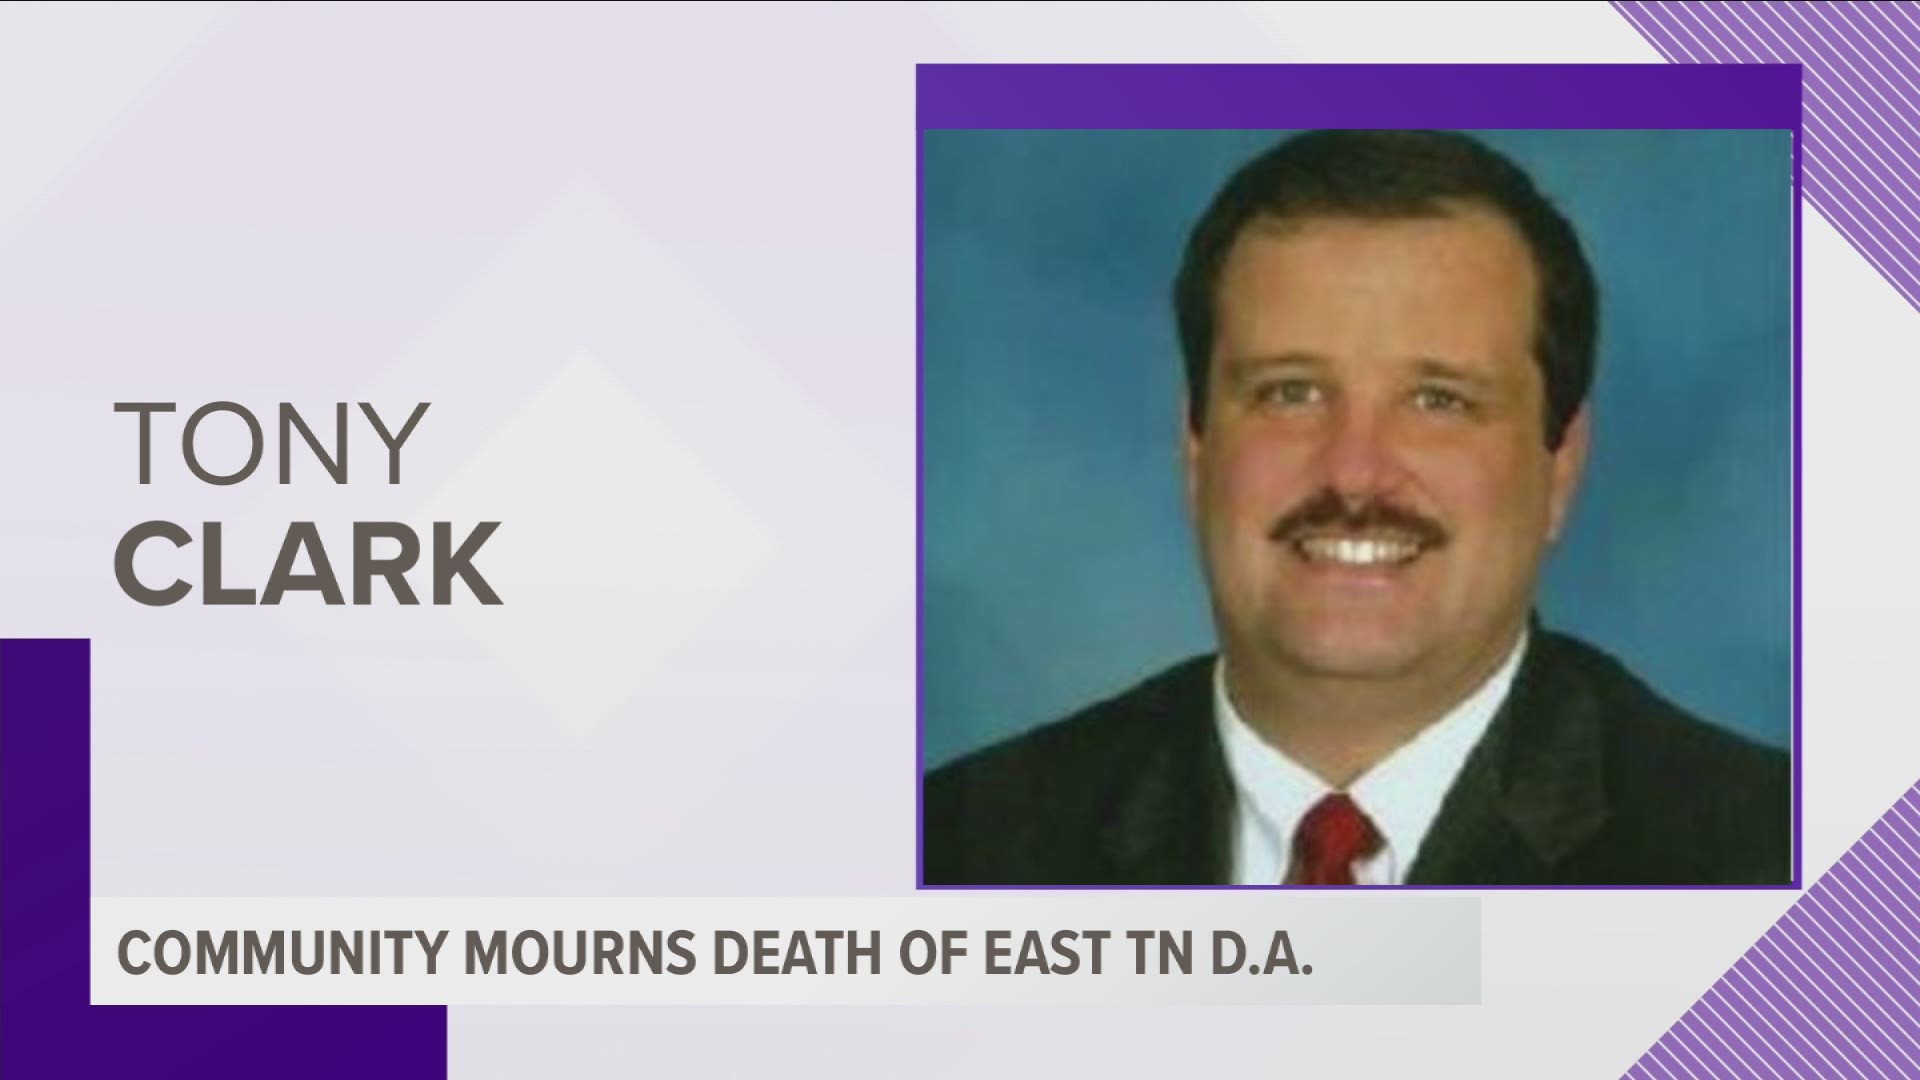 Tony Clark, the East Tennessee District Attorney for district 1, passed away in a Nashville hotel Sunday morning.